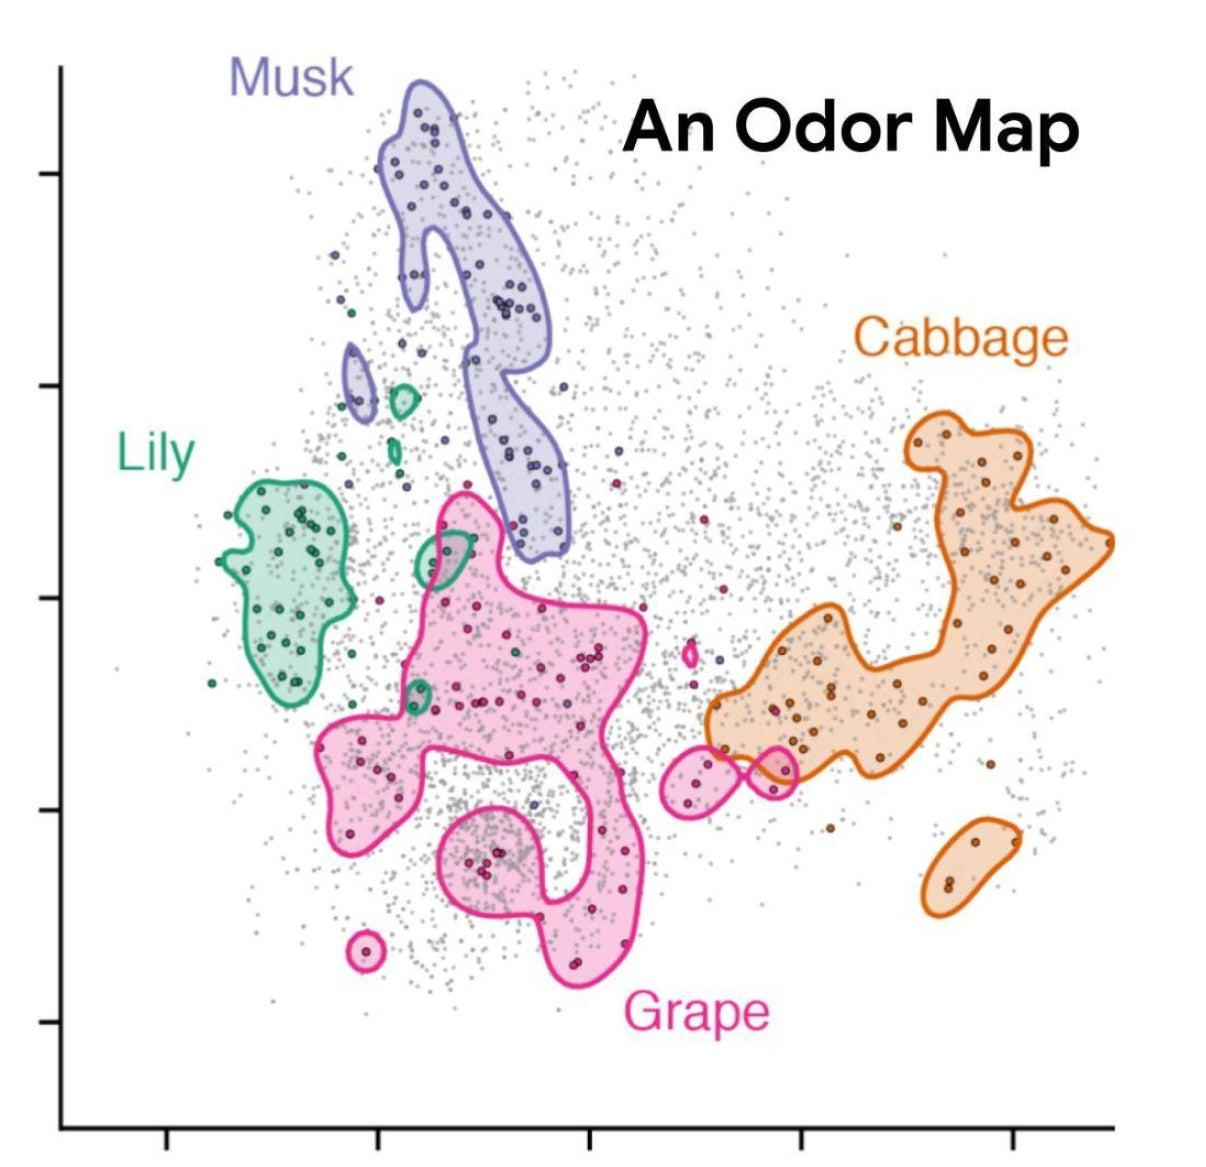 An illustration of the scent map (musk, lily, cabbage and grape)